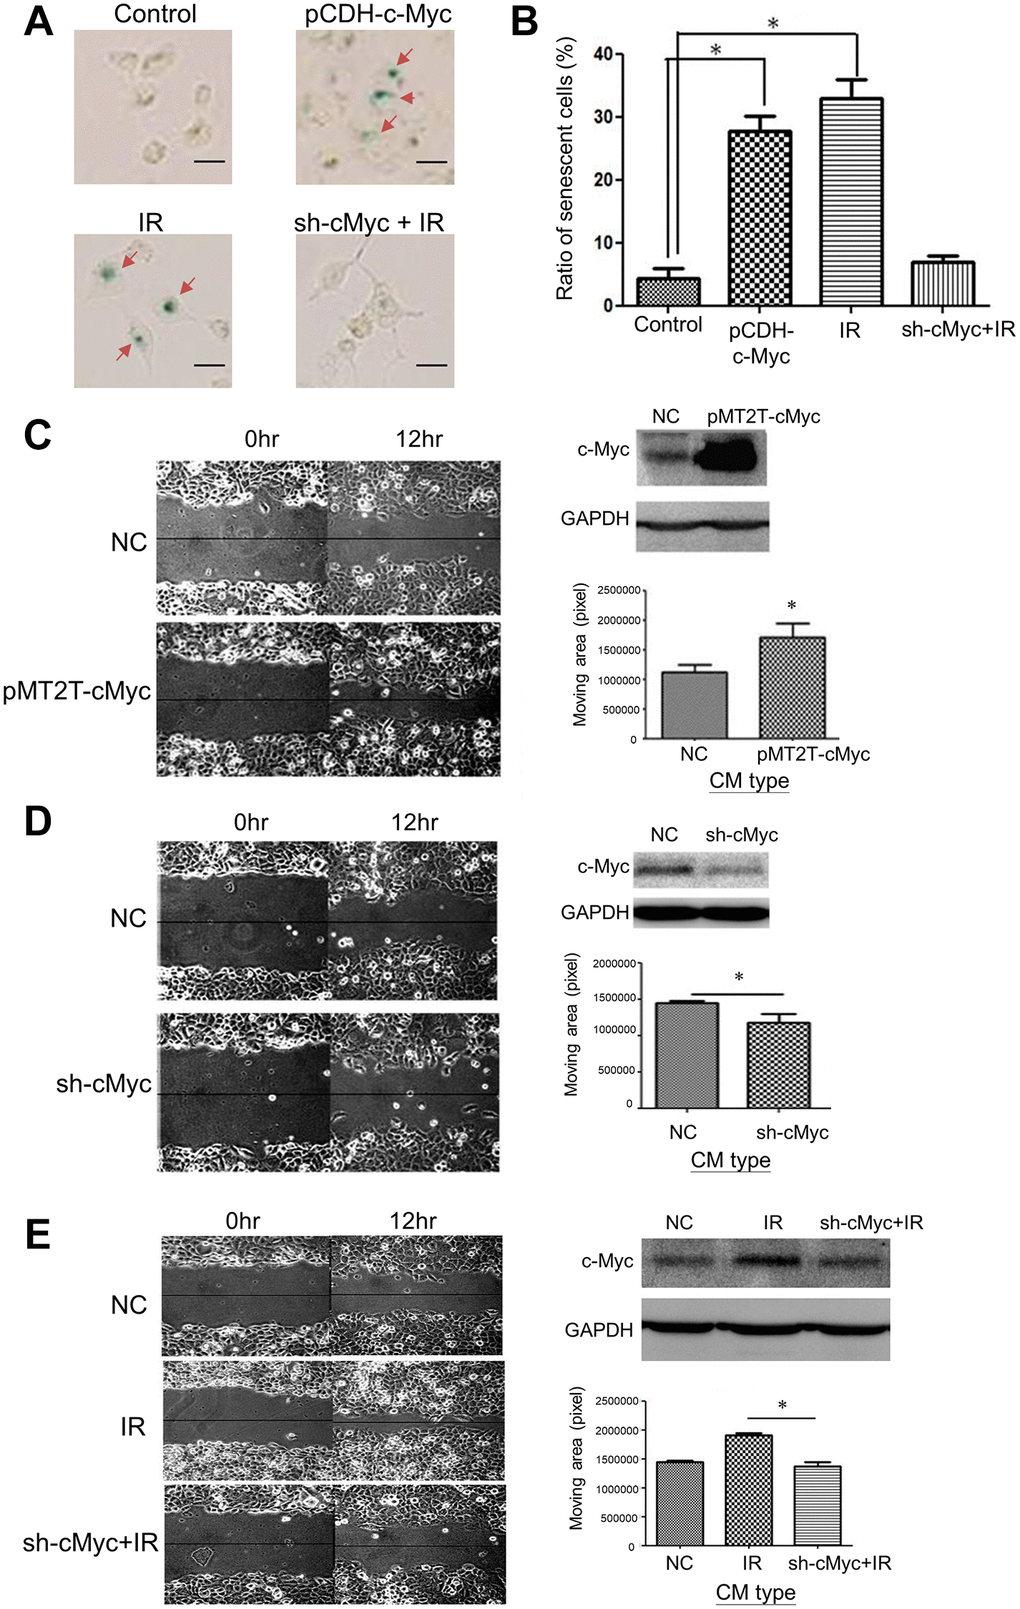 Effects of c-Myc expression on LDR induced senescence and unirradiated cell migration. (A) The level of SA-β-gal staining was increased by over-expression of c-Myc in H1299 cells. Radiation induced SA-β-gal was reduced by knockdown of c-Myc using shRNA. Scale bar: 100 μm. (B) Quantification of cell number stained by X-gal after different treatments. (C) Comparison of cell migration rate between normal medium and CM collected from c-Myc cover-expressing cells. (D) Comparison of cell migration rate between normal medium and CM collected from c-Myc knockdown cells. (E) Enhanced migration of H1299 cells by CM collected from LDR irradiated cells was suppressed by knockdown of c-Myc in irradiated cells. *p 